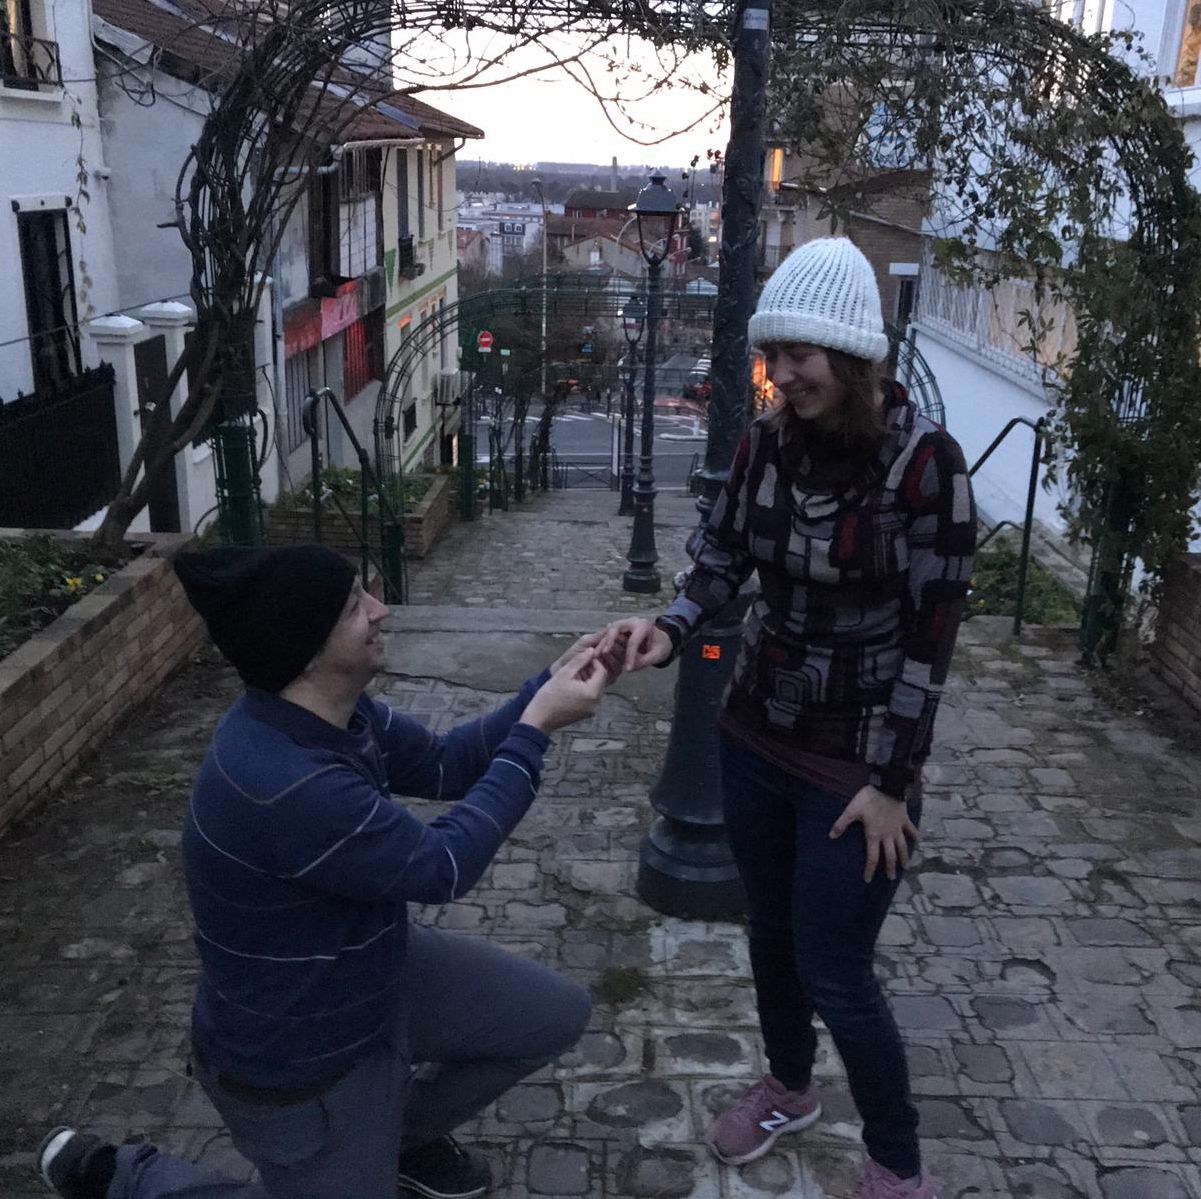 Man proposes on one knee in city